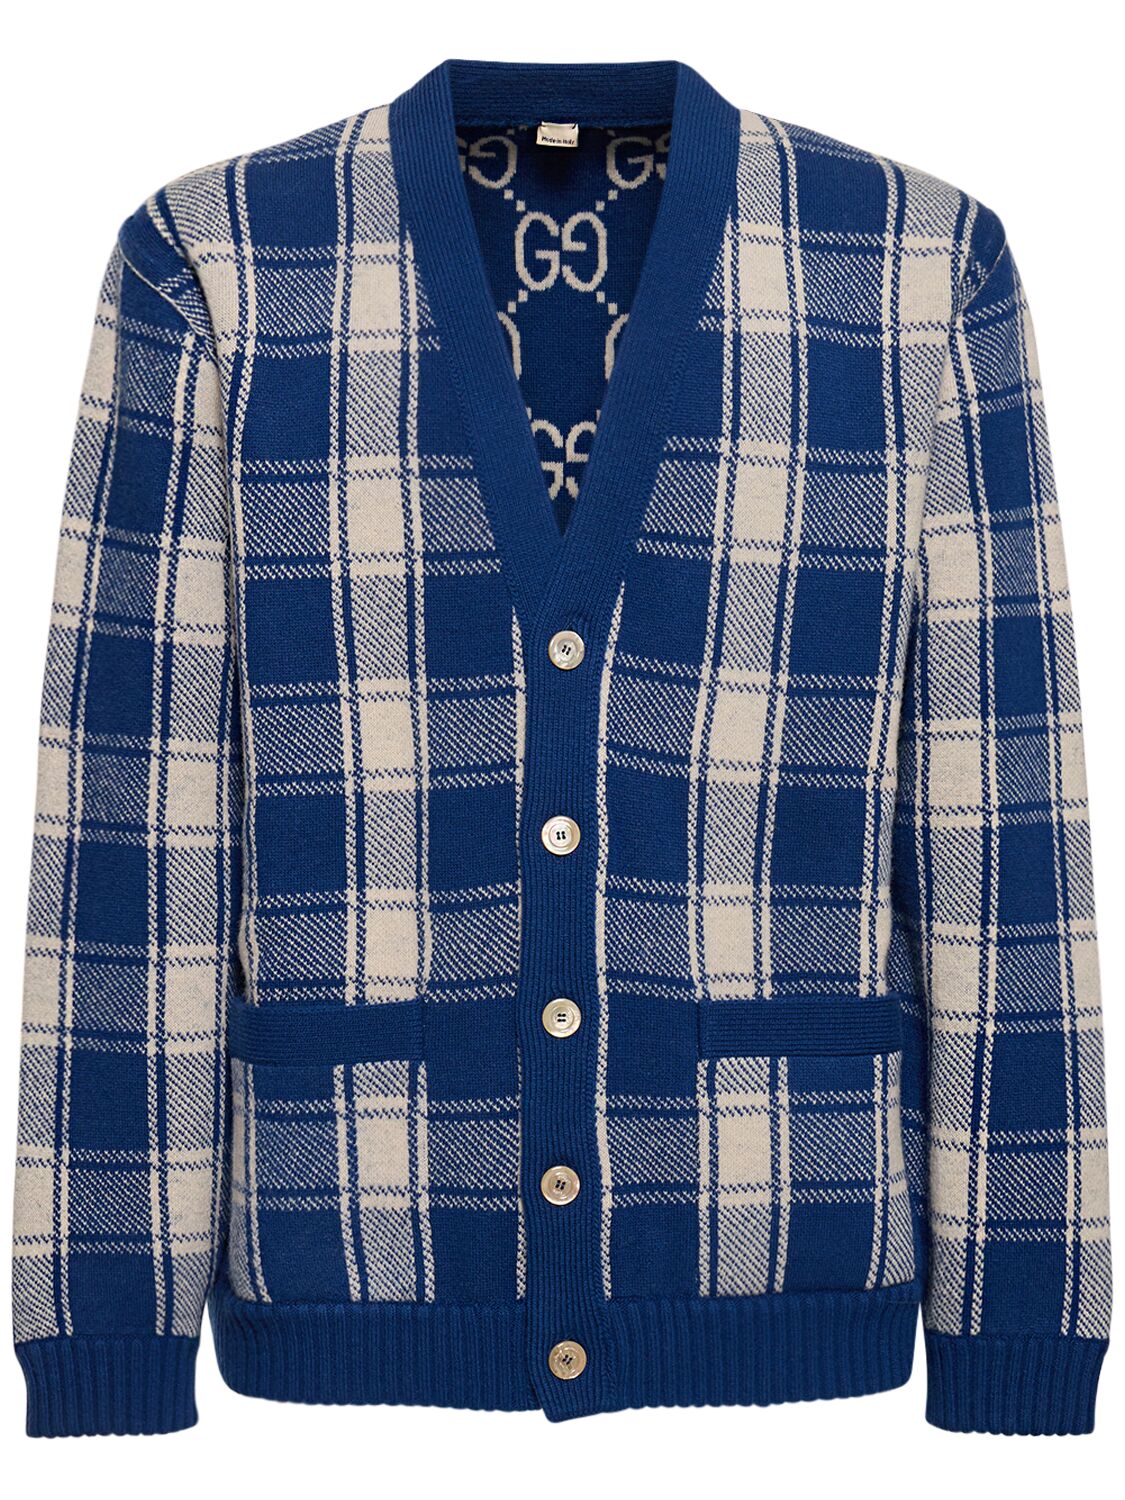 Image of Gg Checked Wool Cardigan